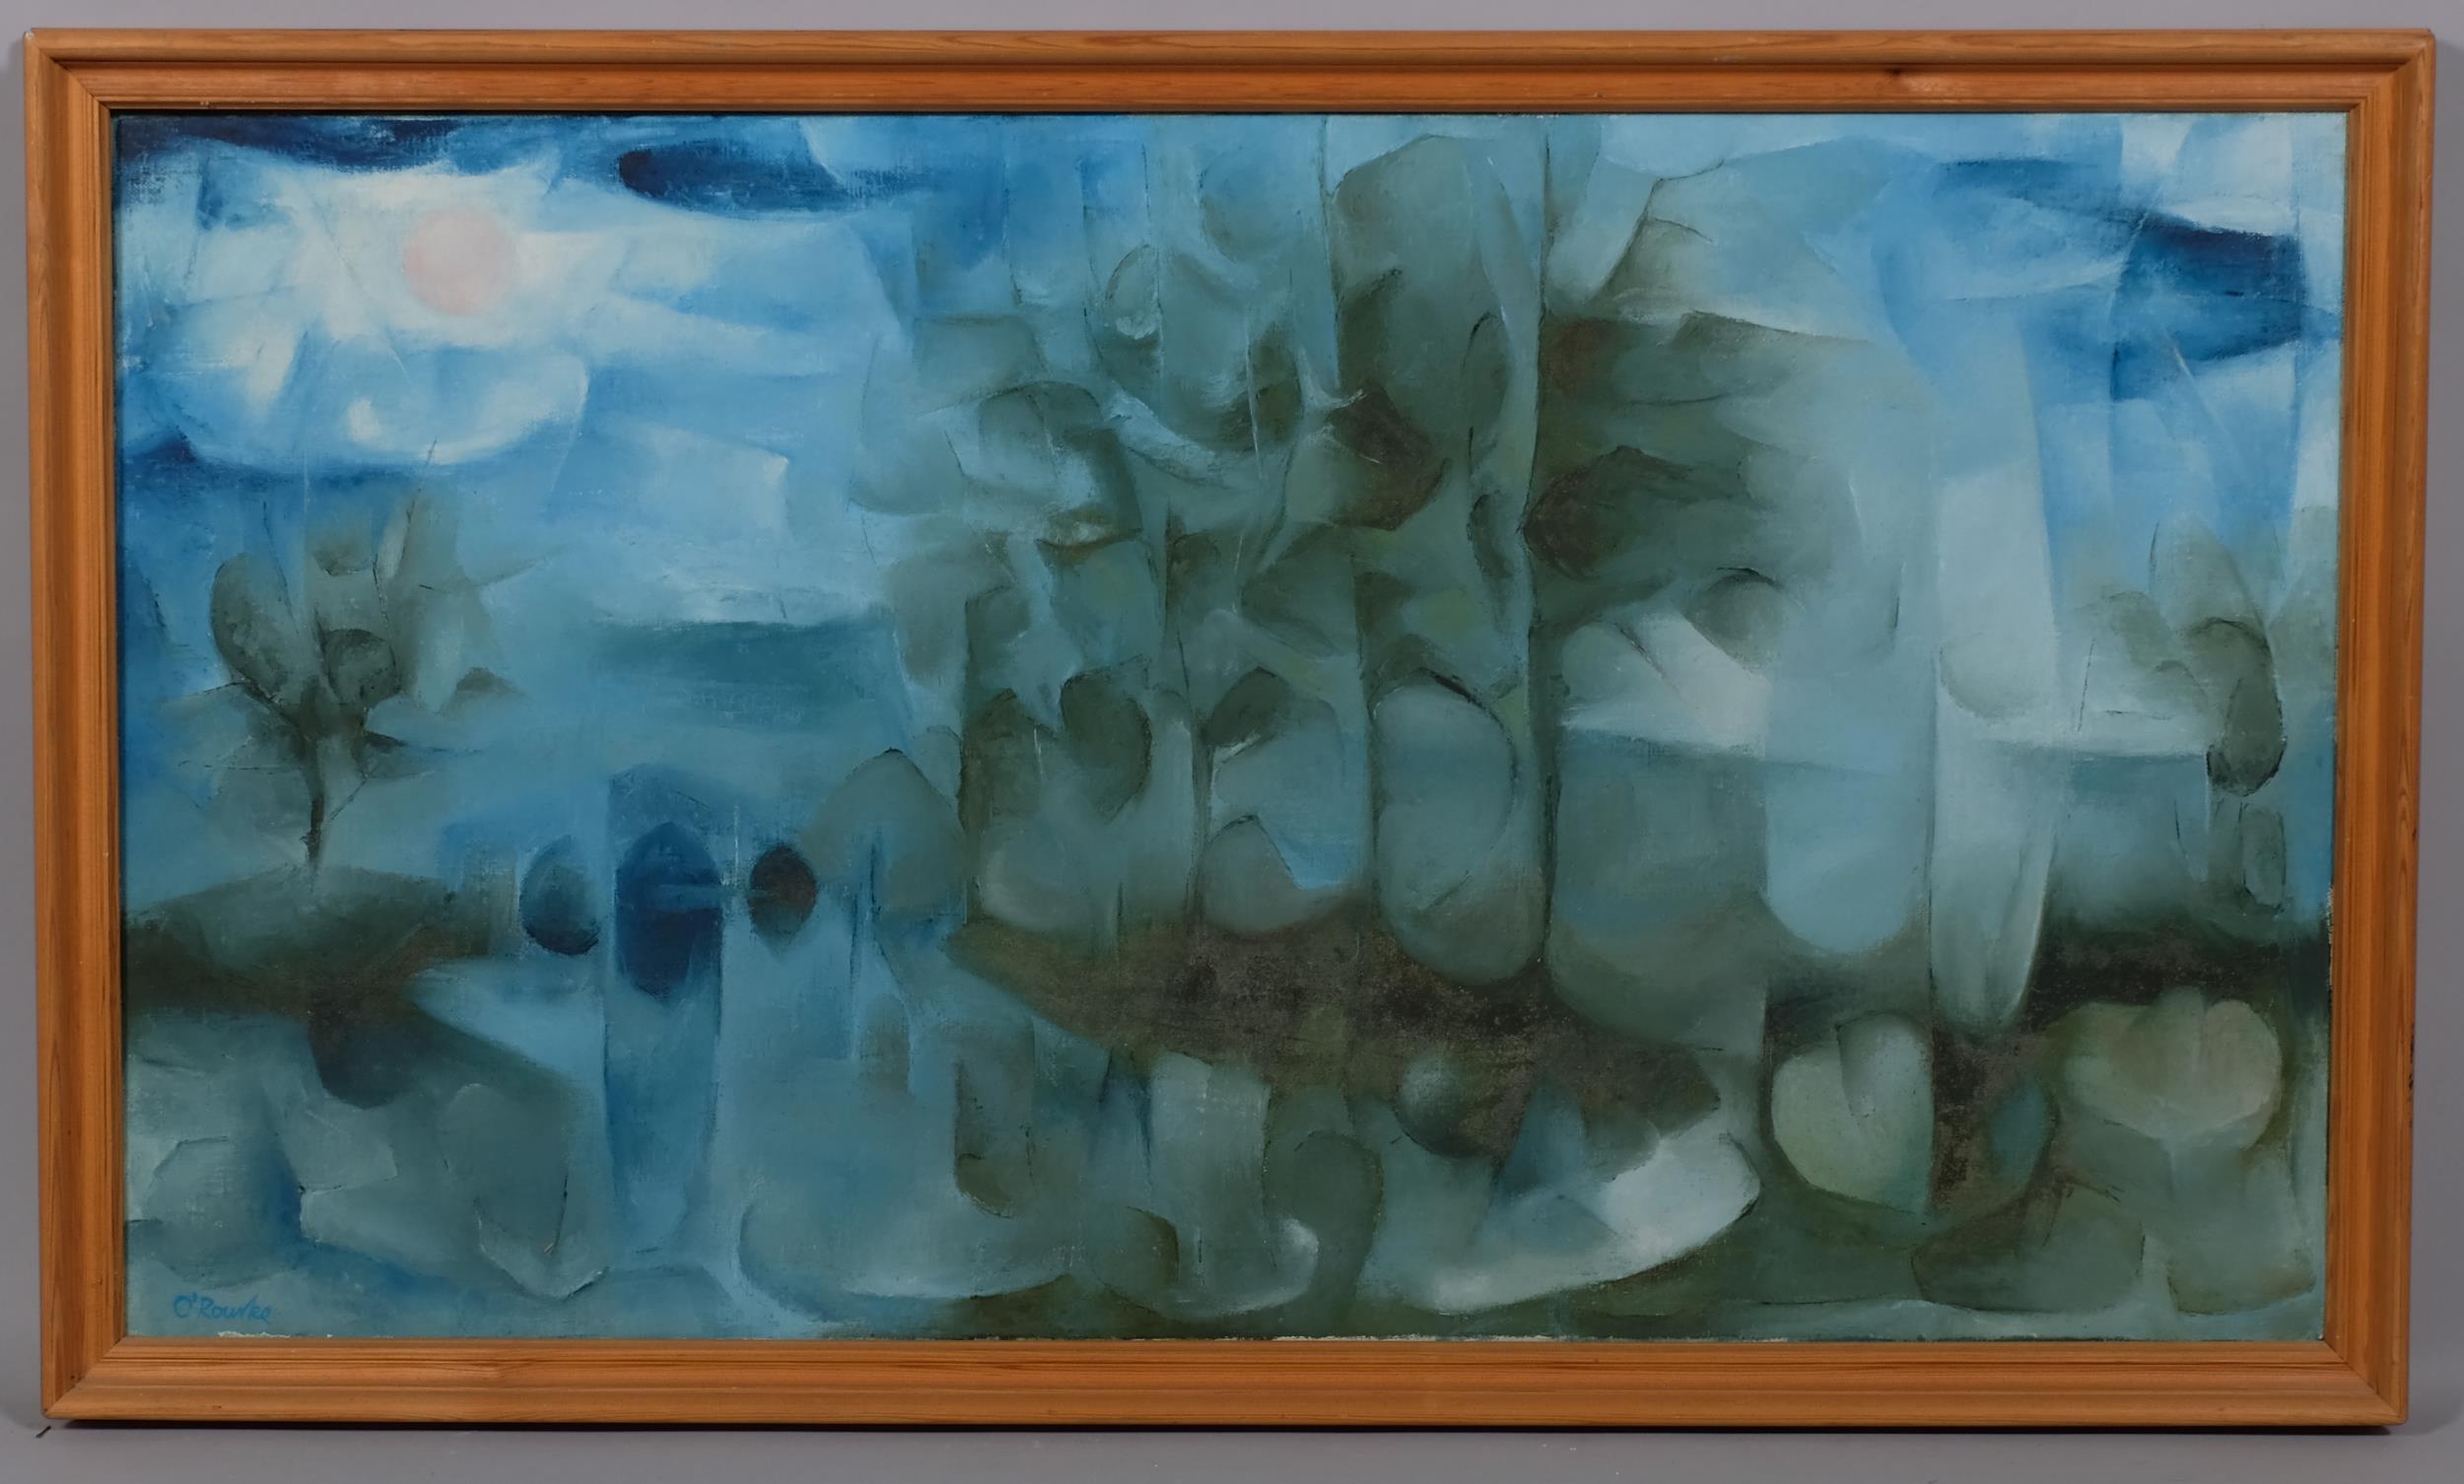 B O'Rourke, blue abstract composition, mid-20th century oil on canvas, signed, 51cm x 91cm, framed